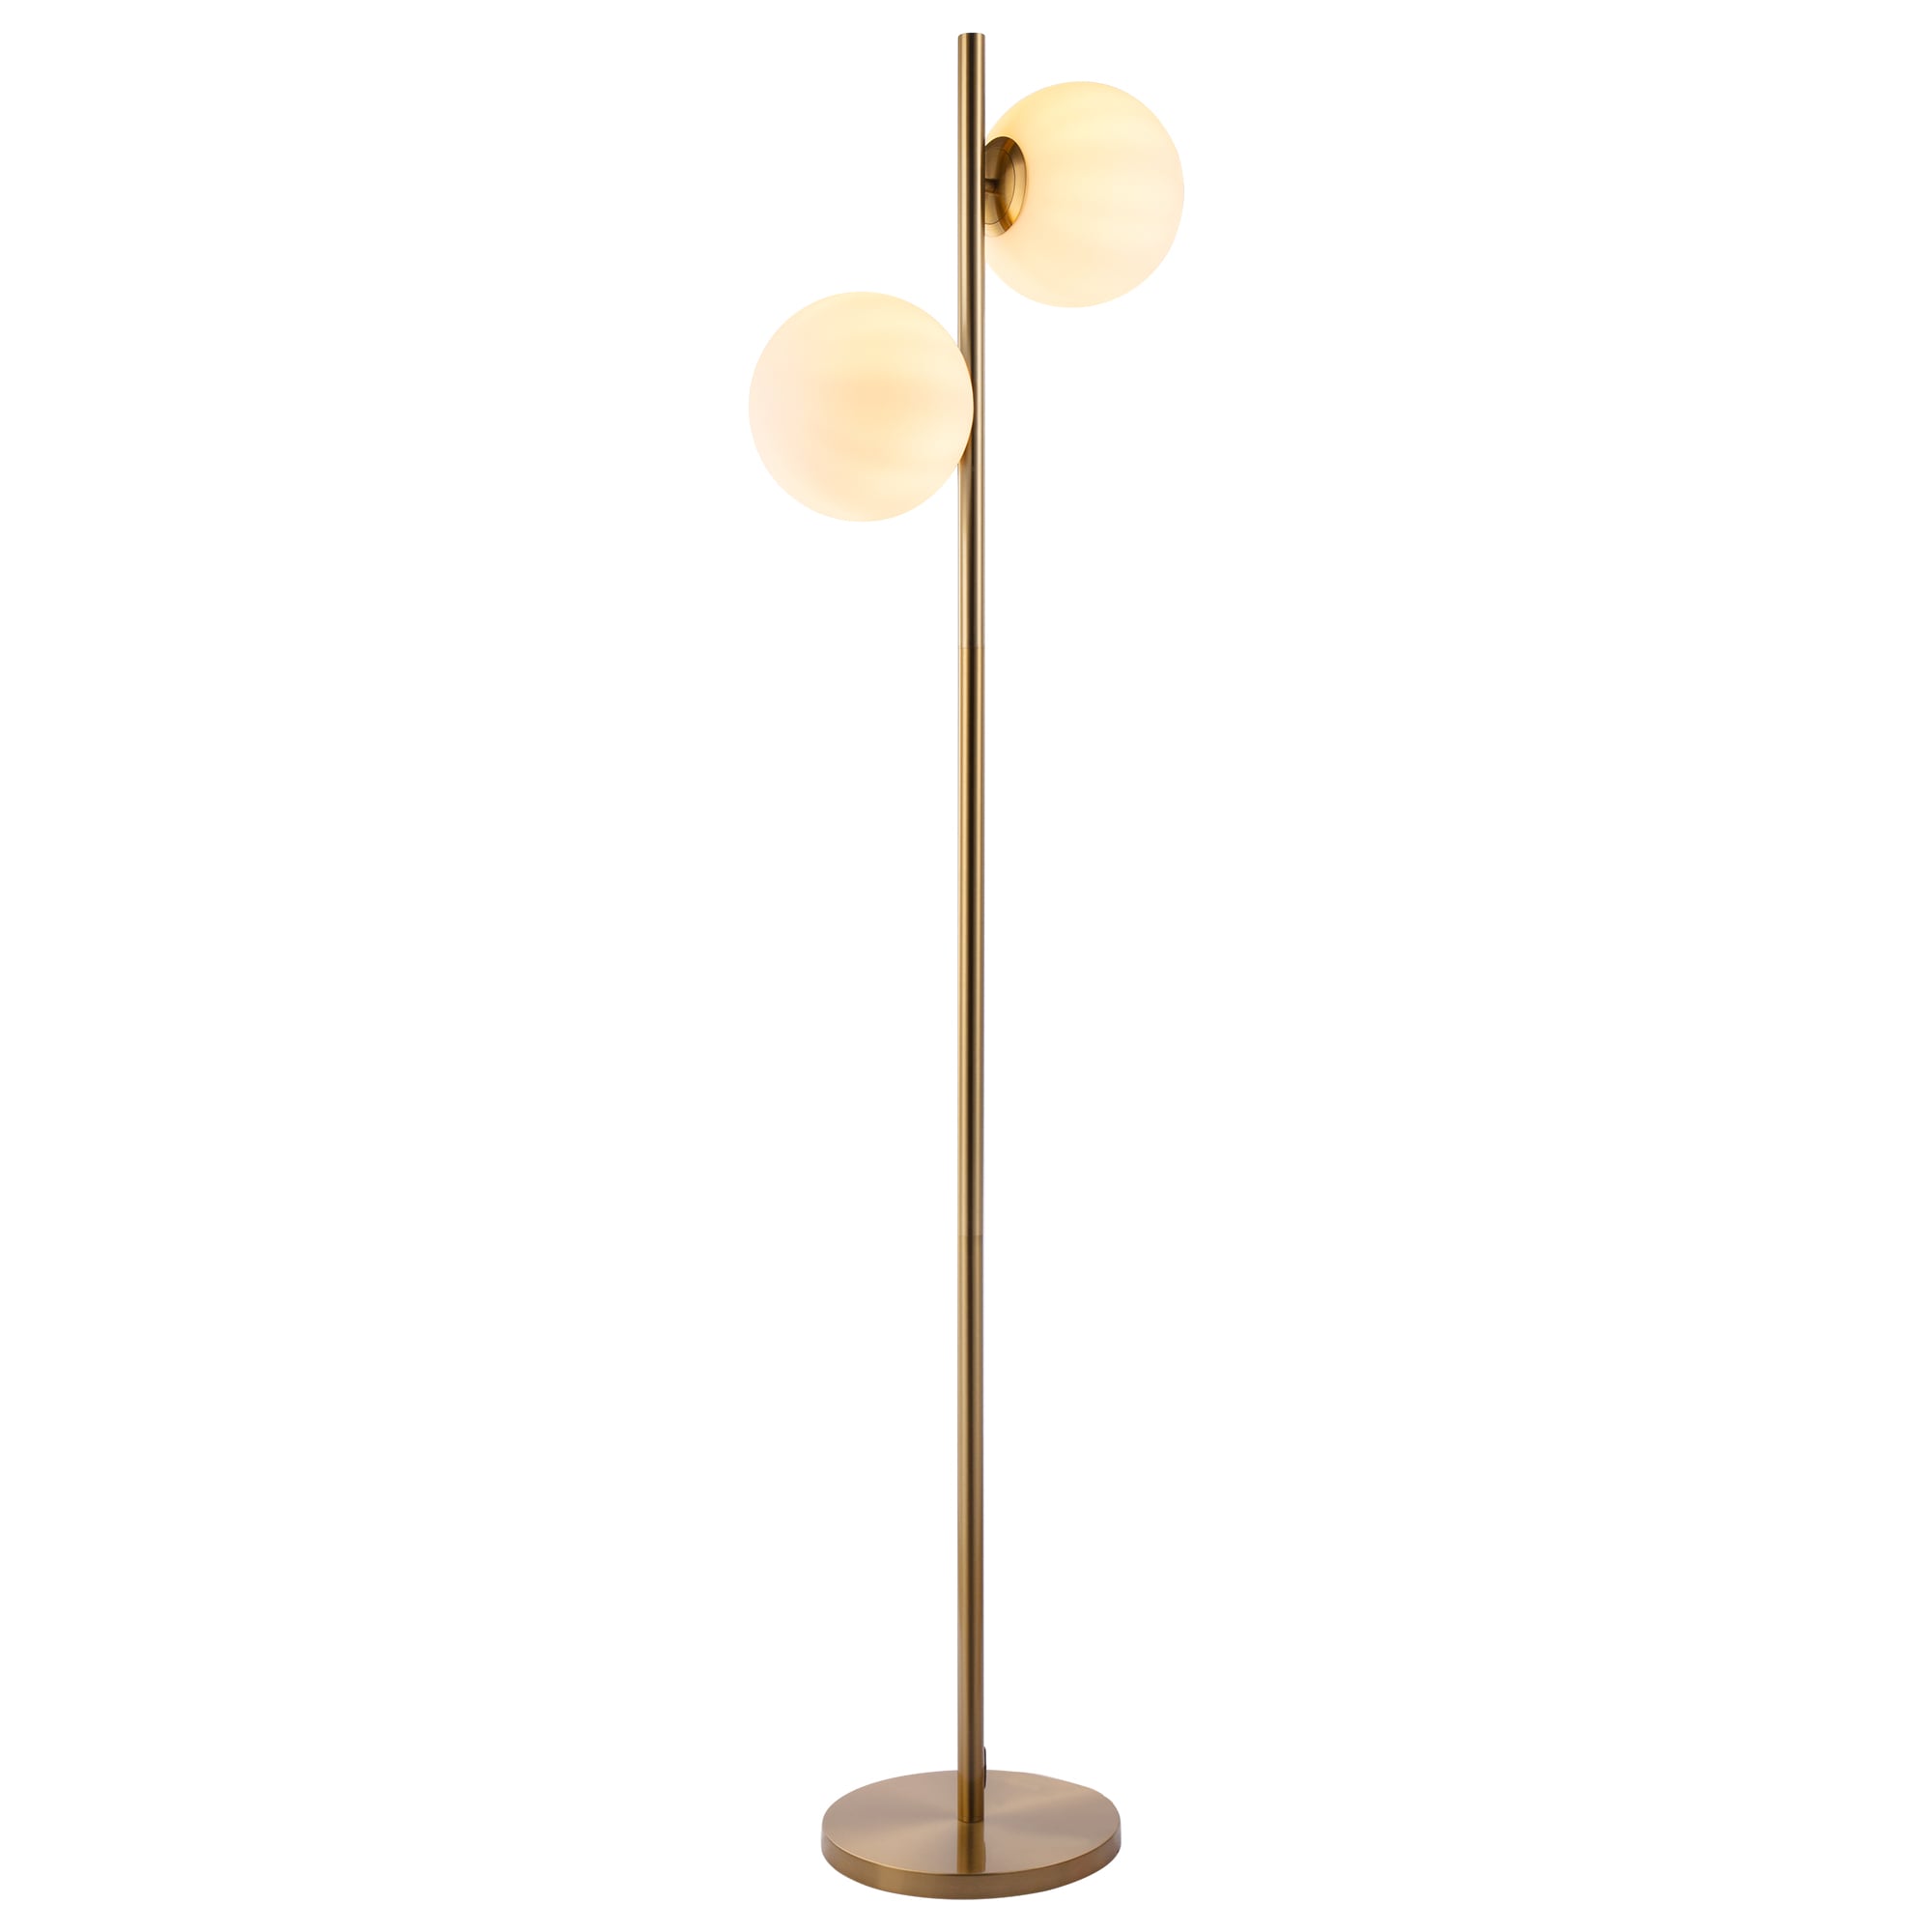 CO-Z Floor Lamps at